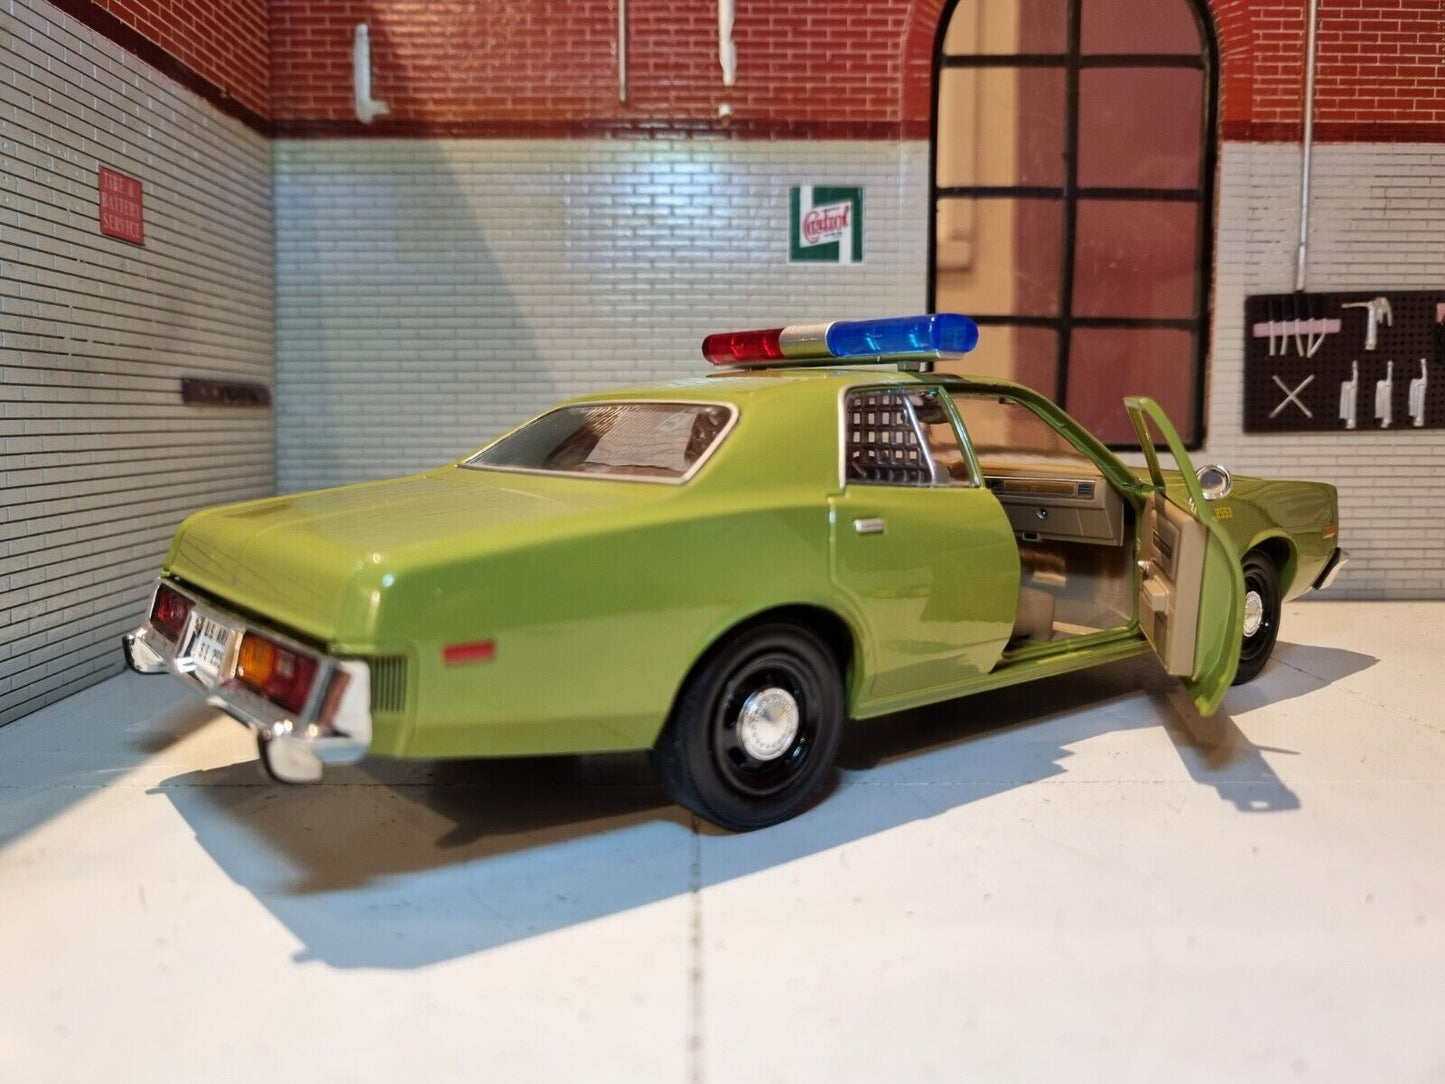 Rear 3/4 View (facing right) of A 1:24 Scale Green Plymouth Fury With The Passenger Door Open